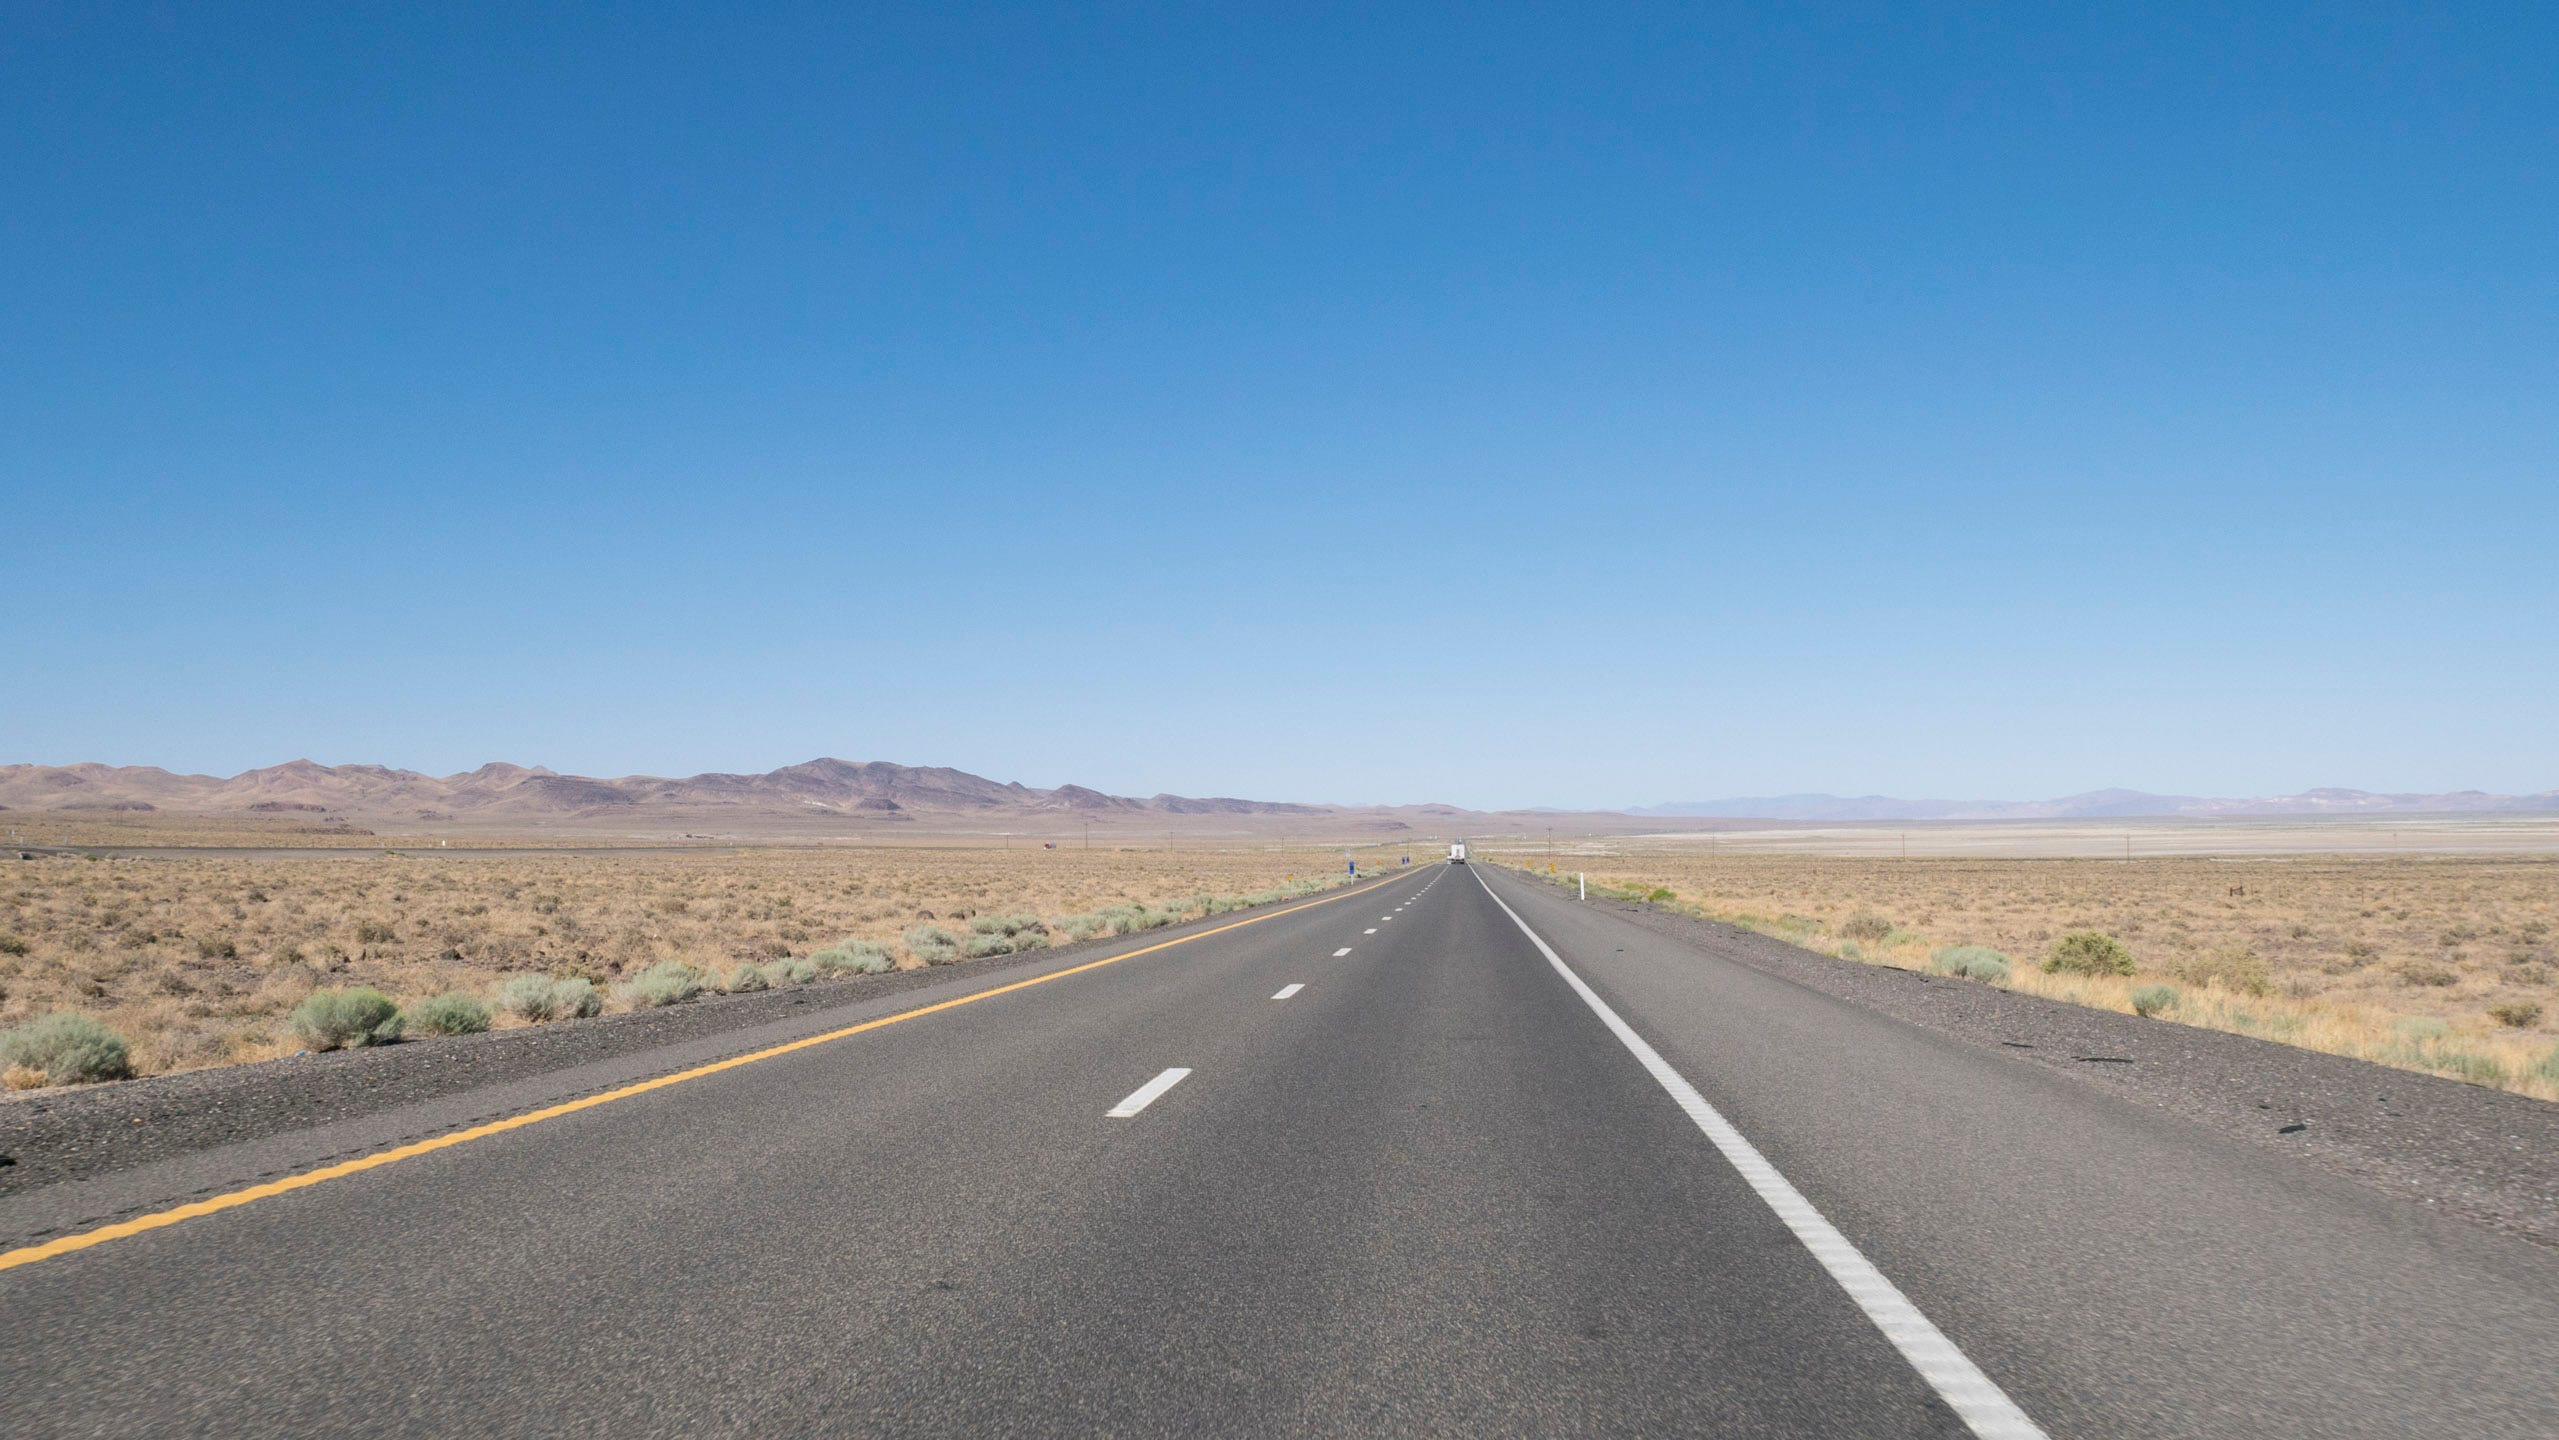 Photo of riding on the highway across the dry and barren Forty Mile Desert in Nevada. The sky is crystal blue. The highway heads arrow straight toward a vanishing point on the horizon, where barren brown mountains lie. Alongside the road is sand and sage.